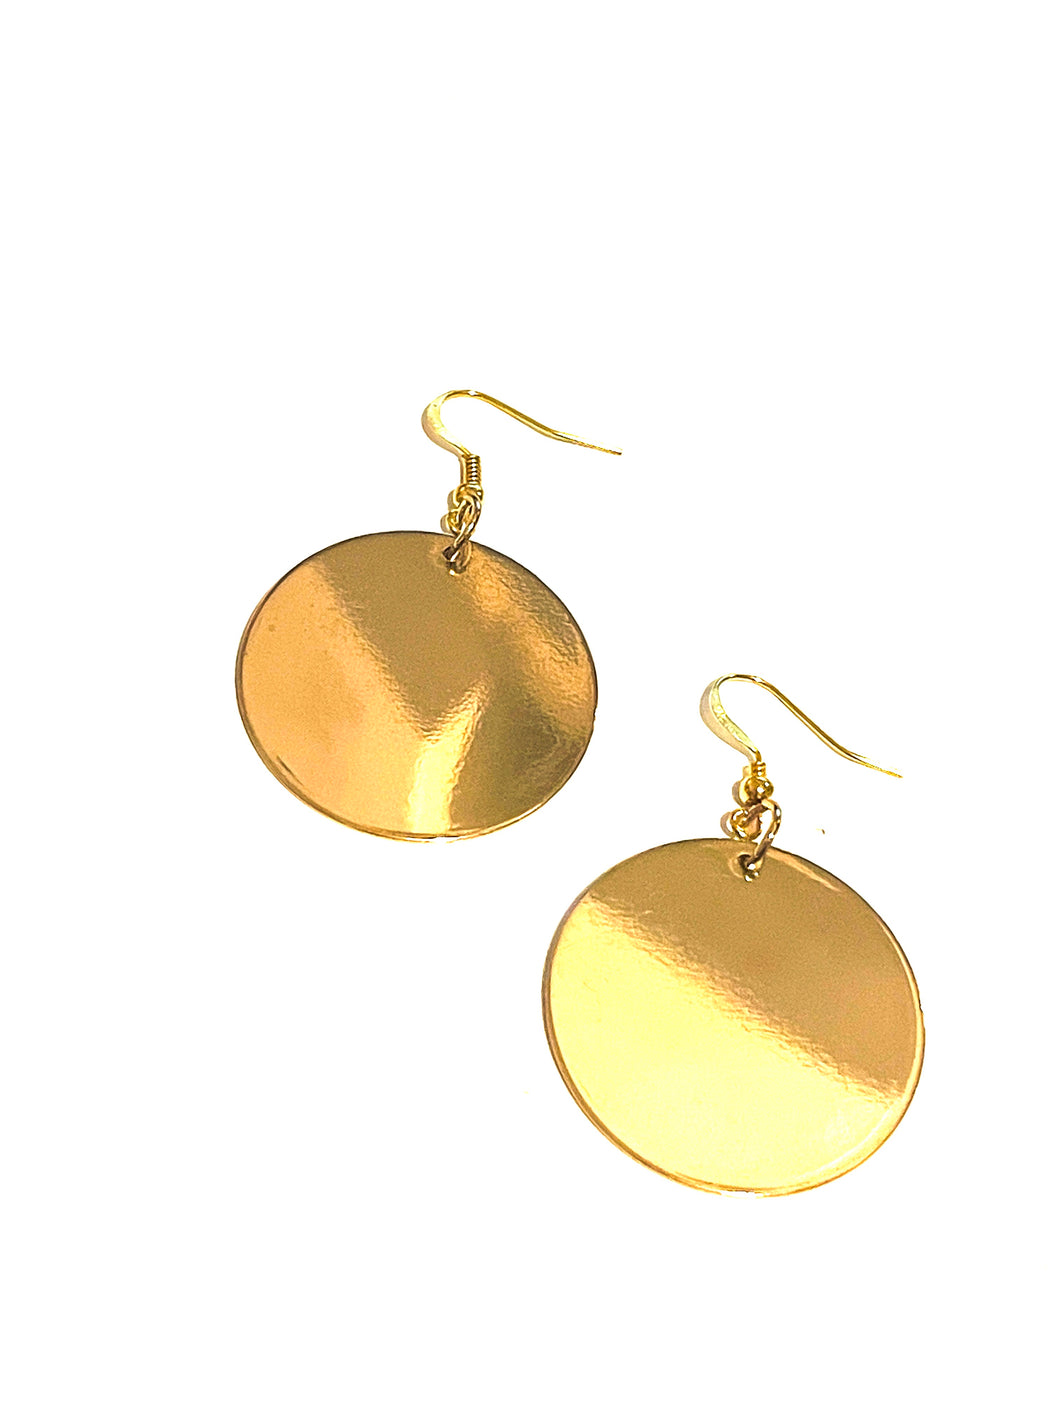 Earrings | Large Gold Circle Discs